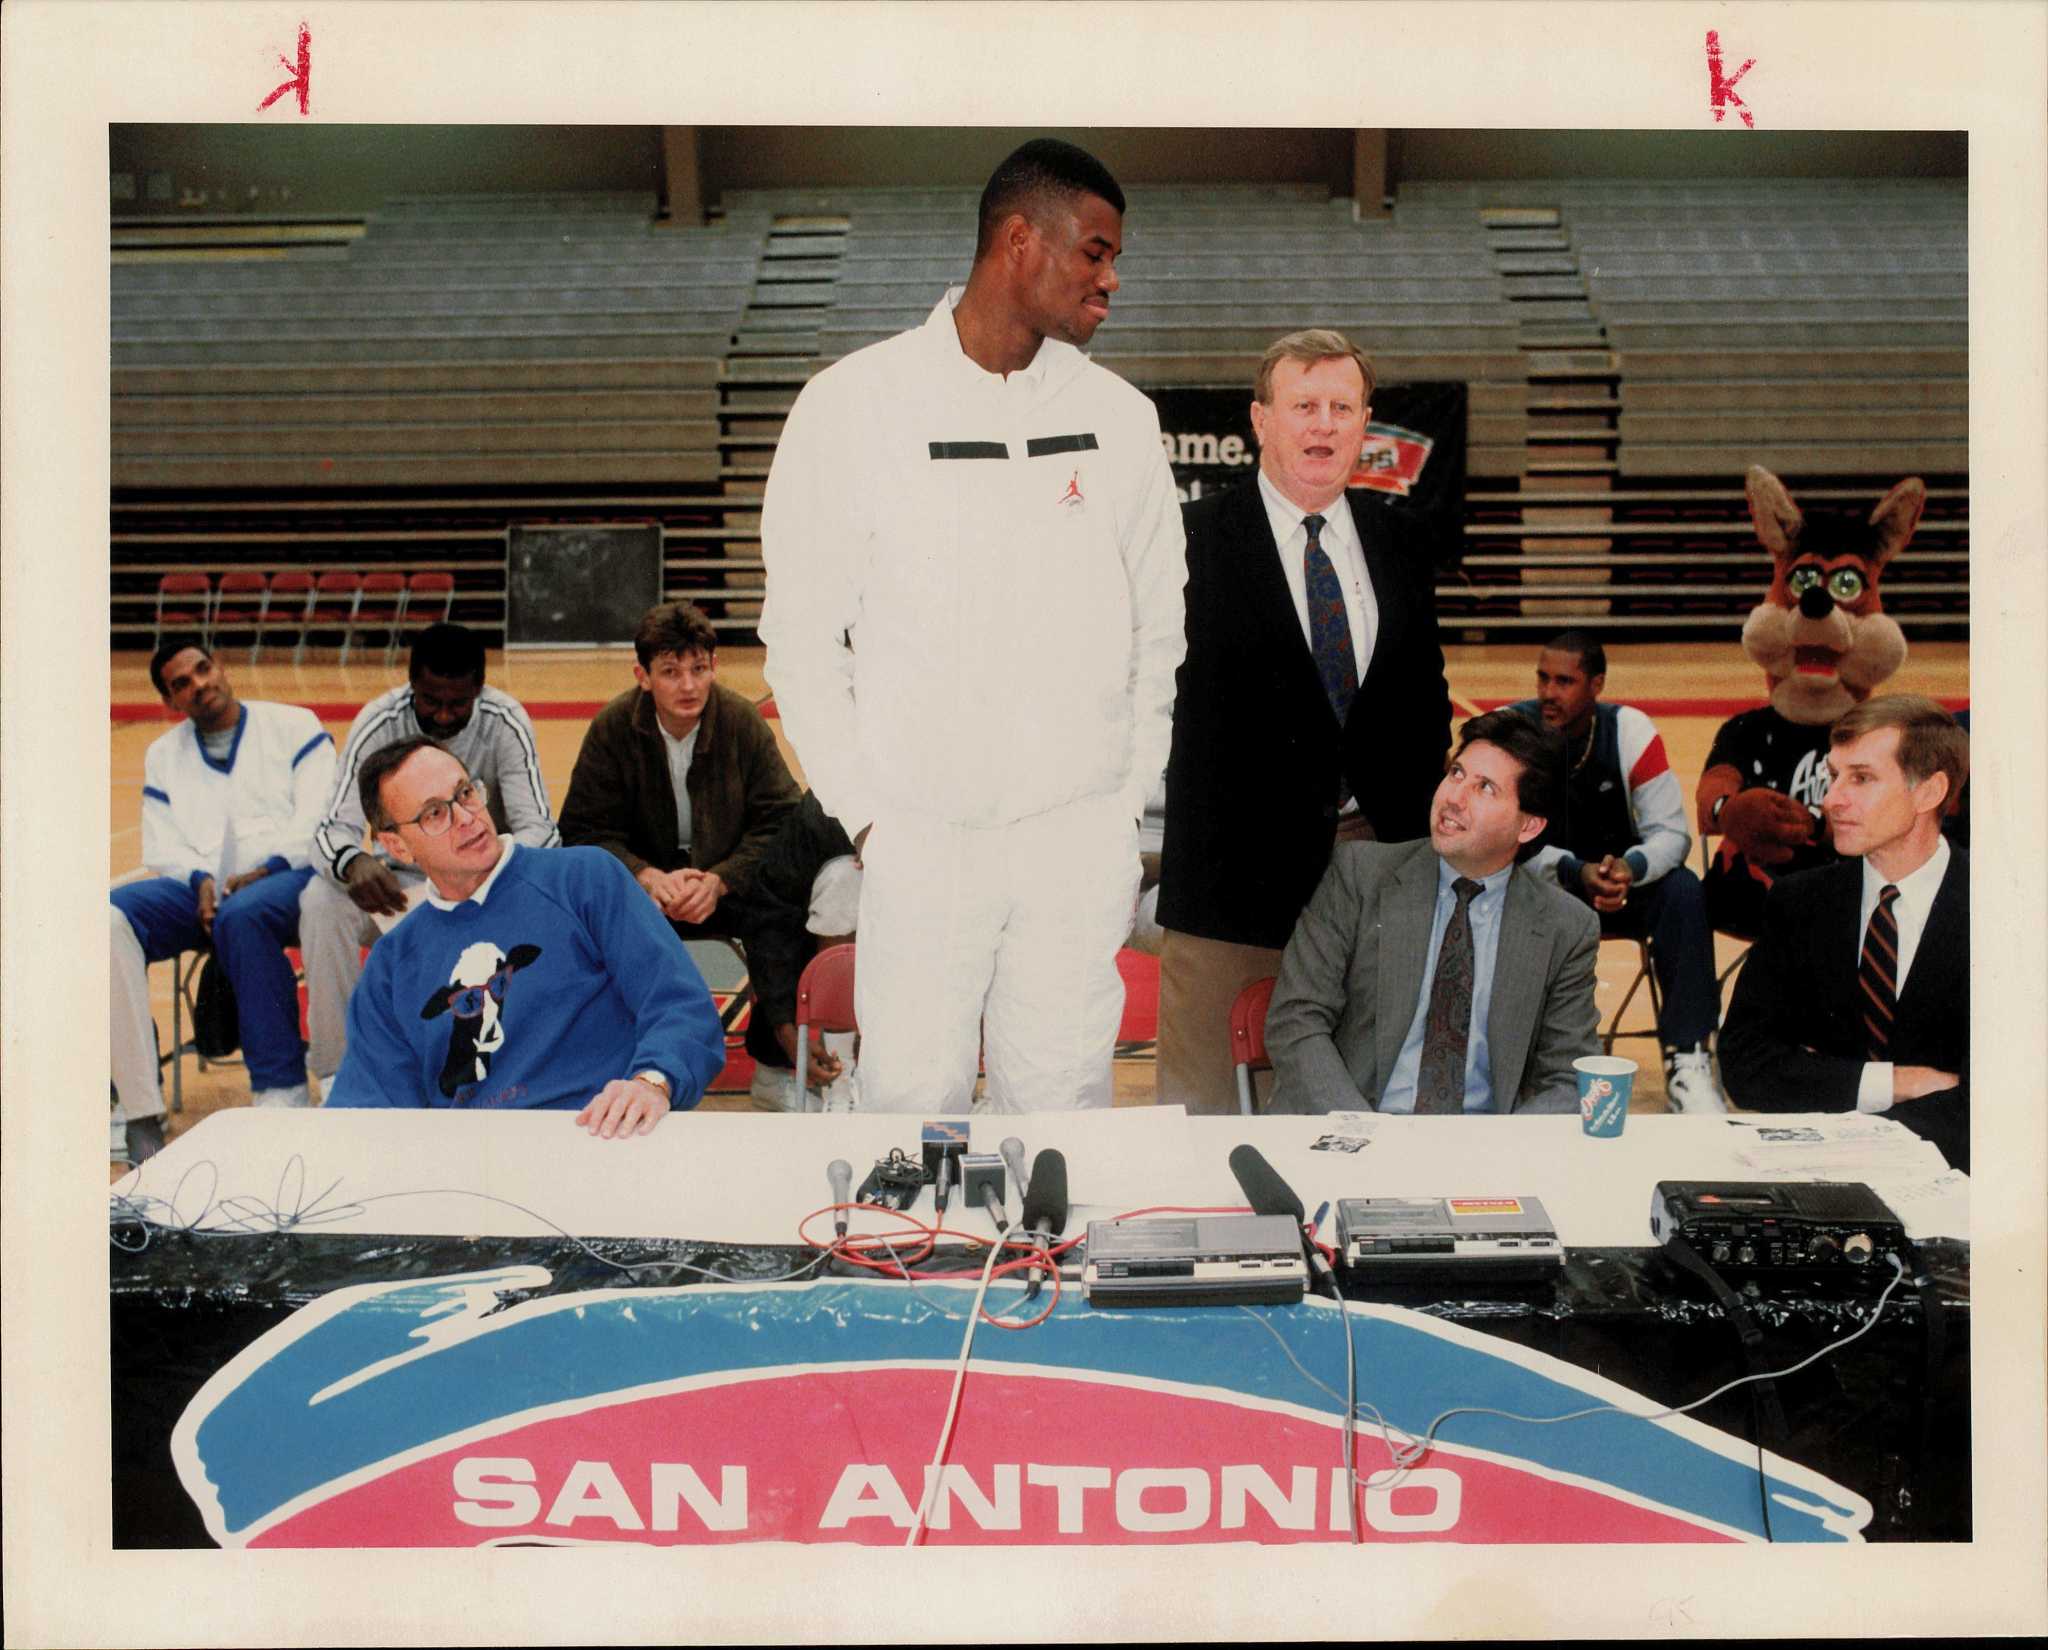 San Antonio Spurs - On this day in 1989 David Robinson made his